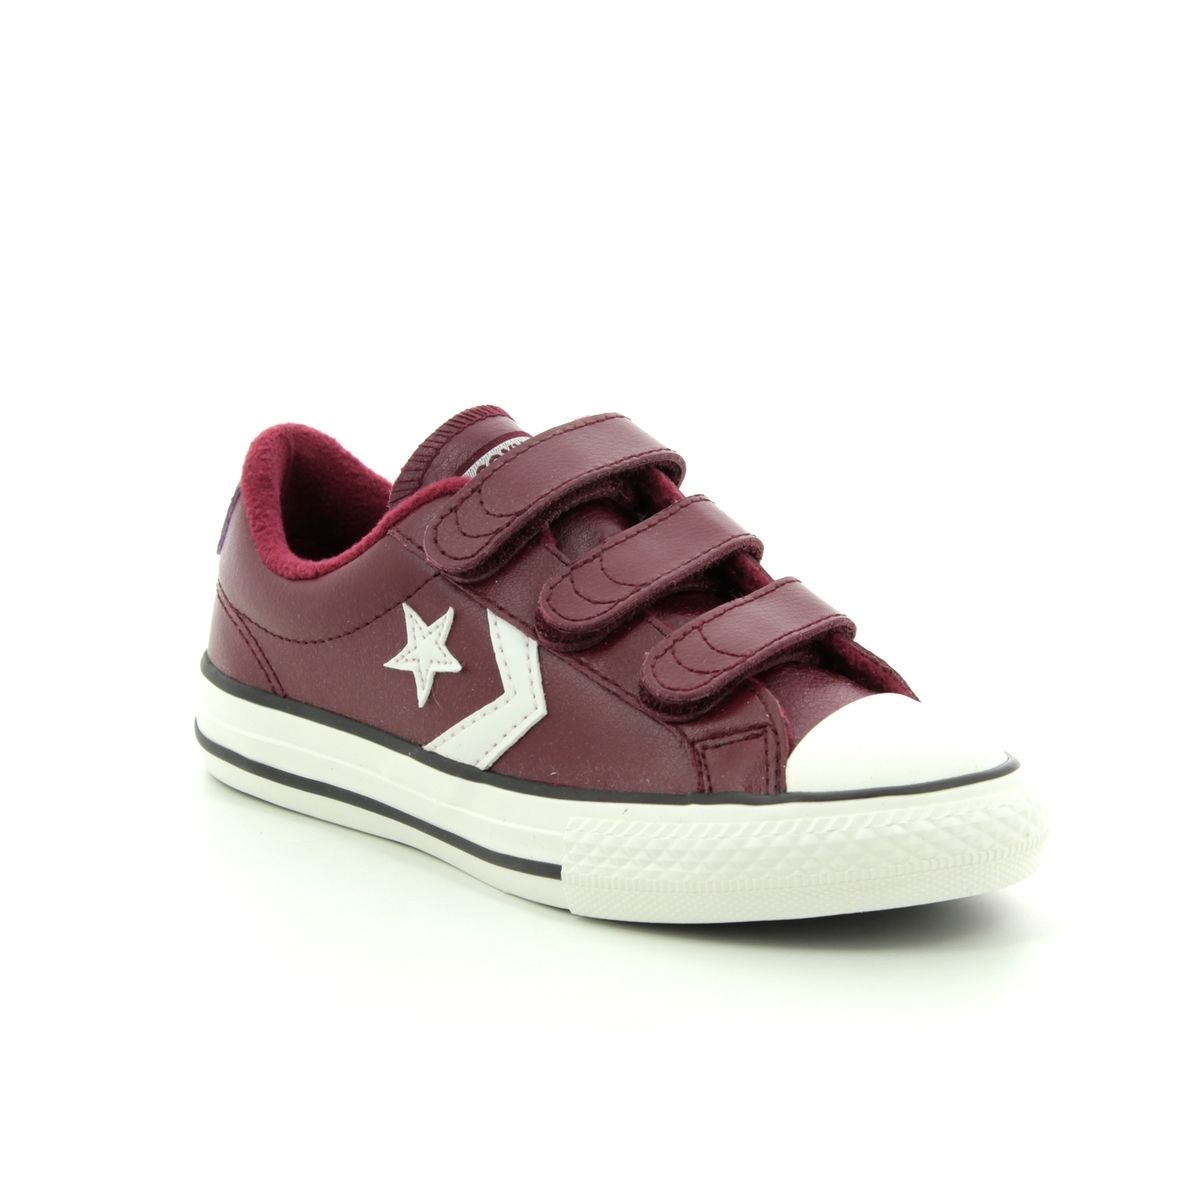 converse trainers burgundy,Quality 